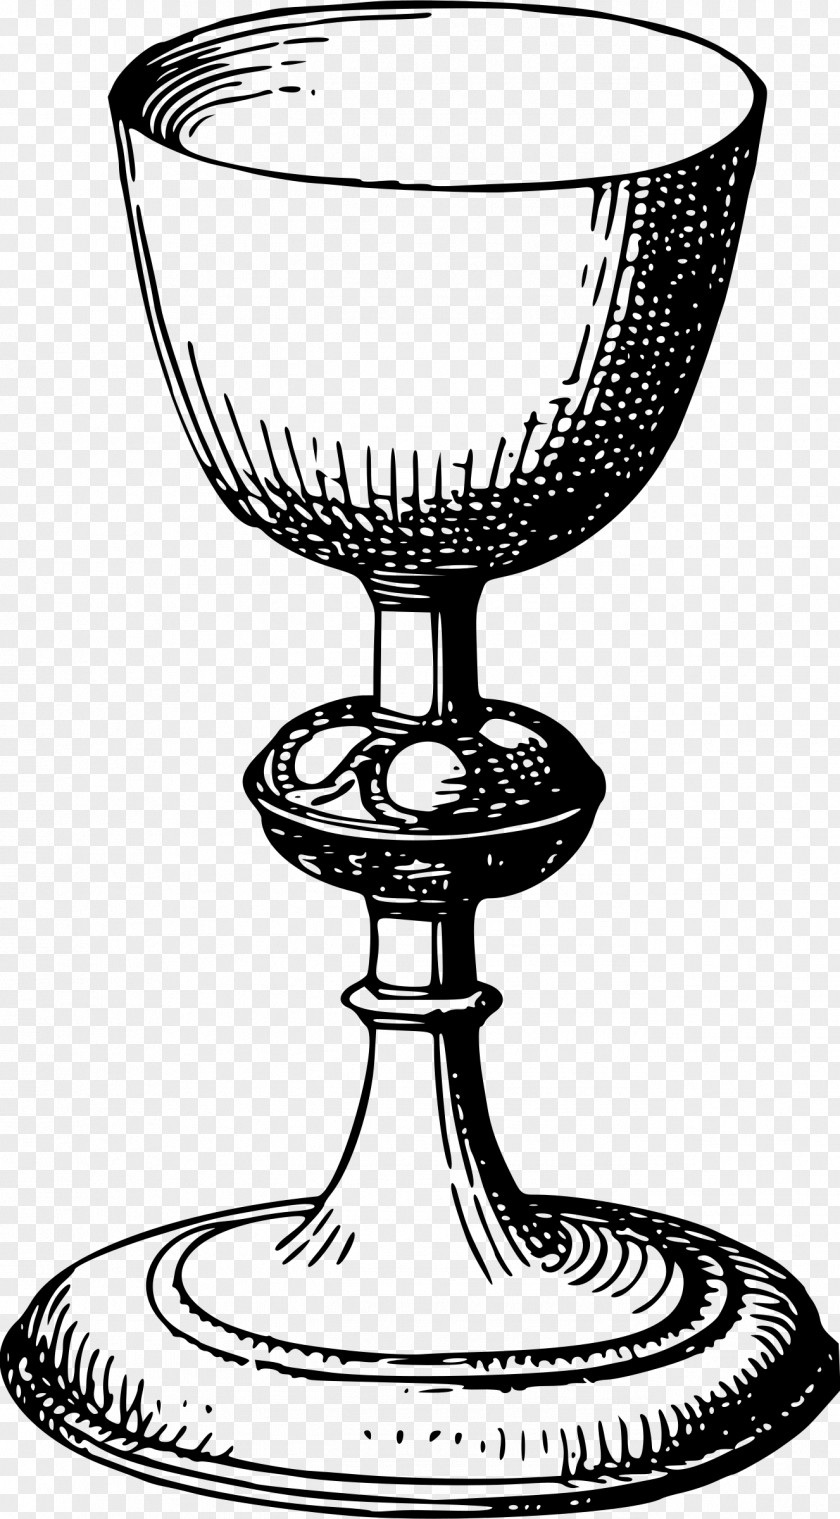 Symbol Eucharist In The Catholic Church First Communion Chalice Last Supper PNG